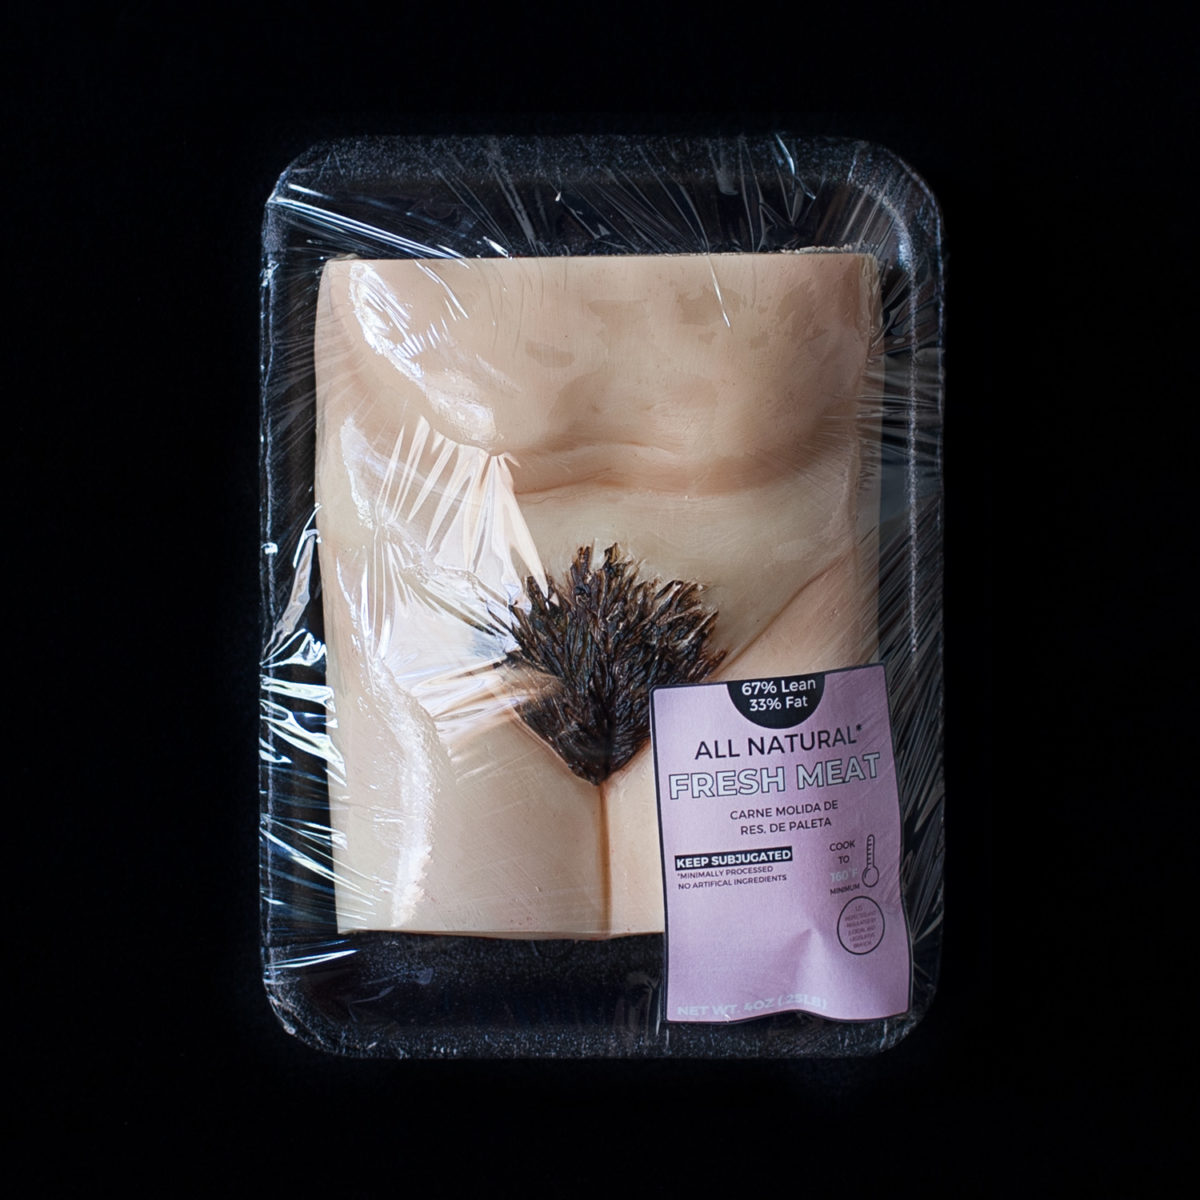 A red velvet cake decorated with hand sculpted modeling chocolate made to look like a human vulva. The cake on a black styrofoam meat tray, wrapped in plastic wrap with a pink label.